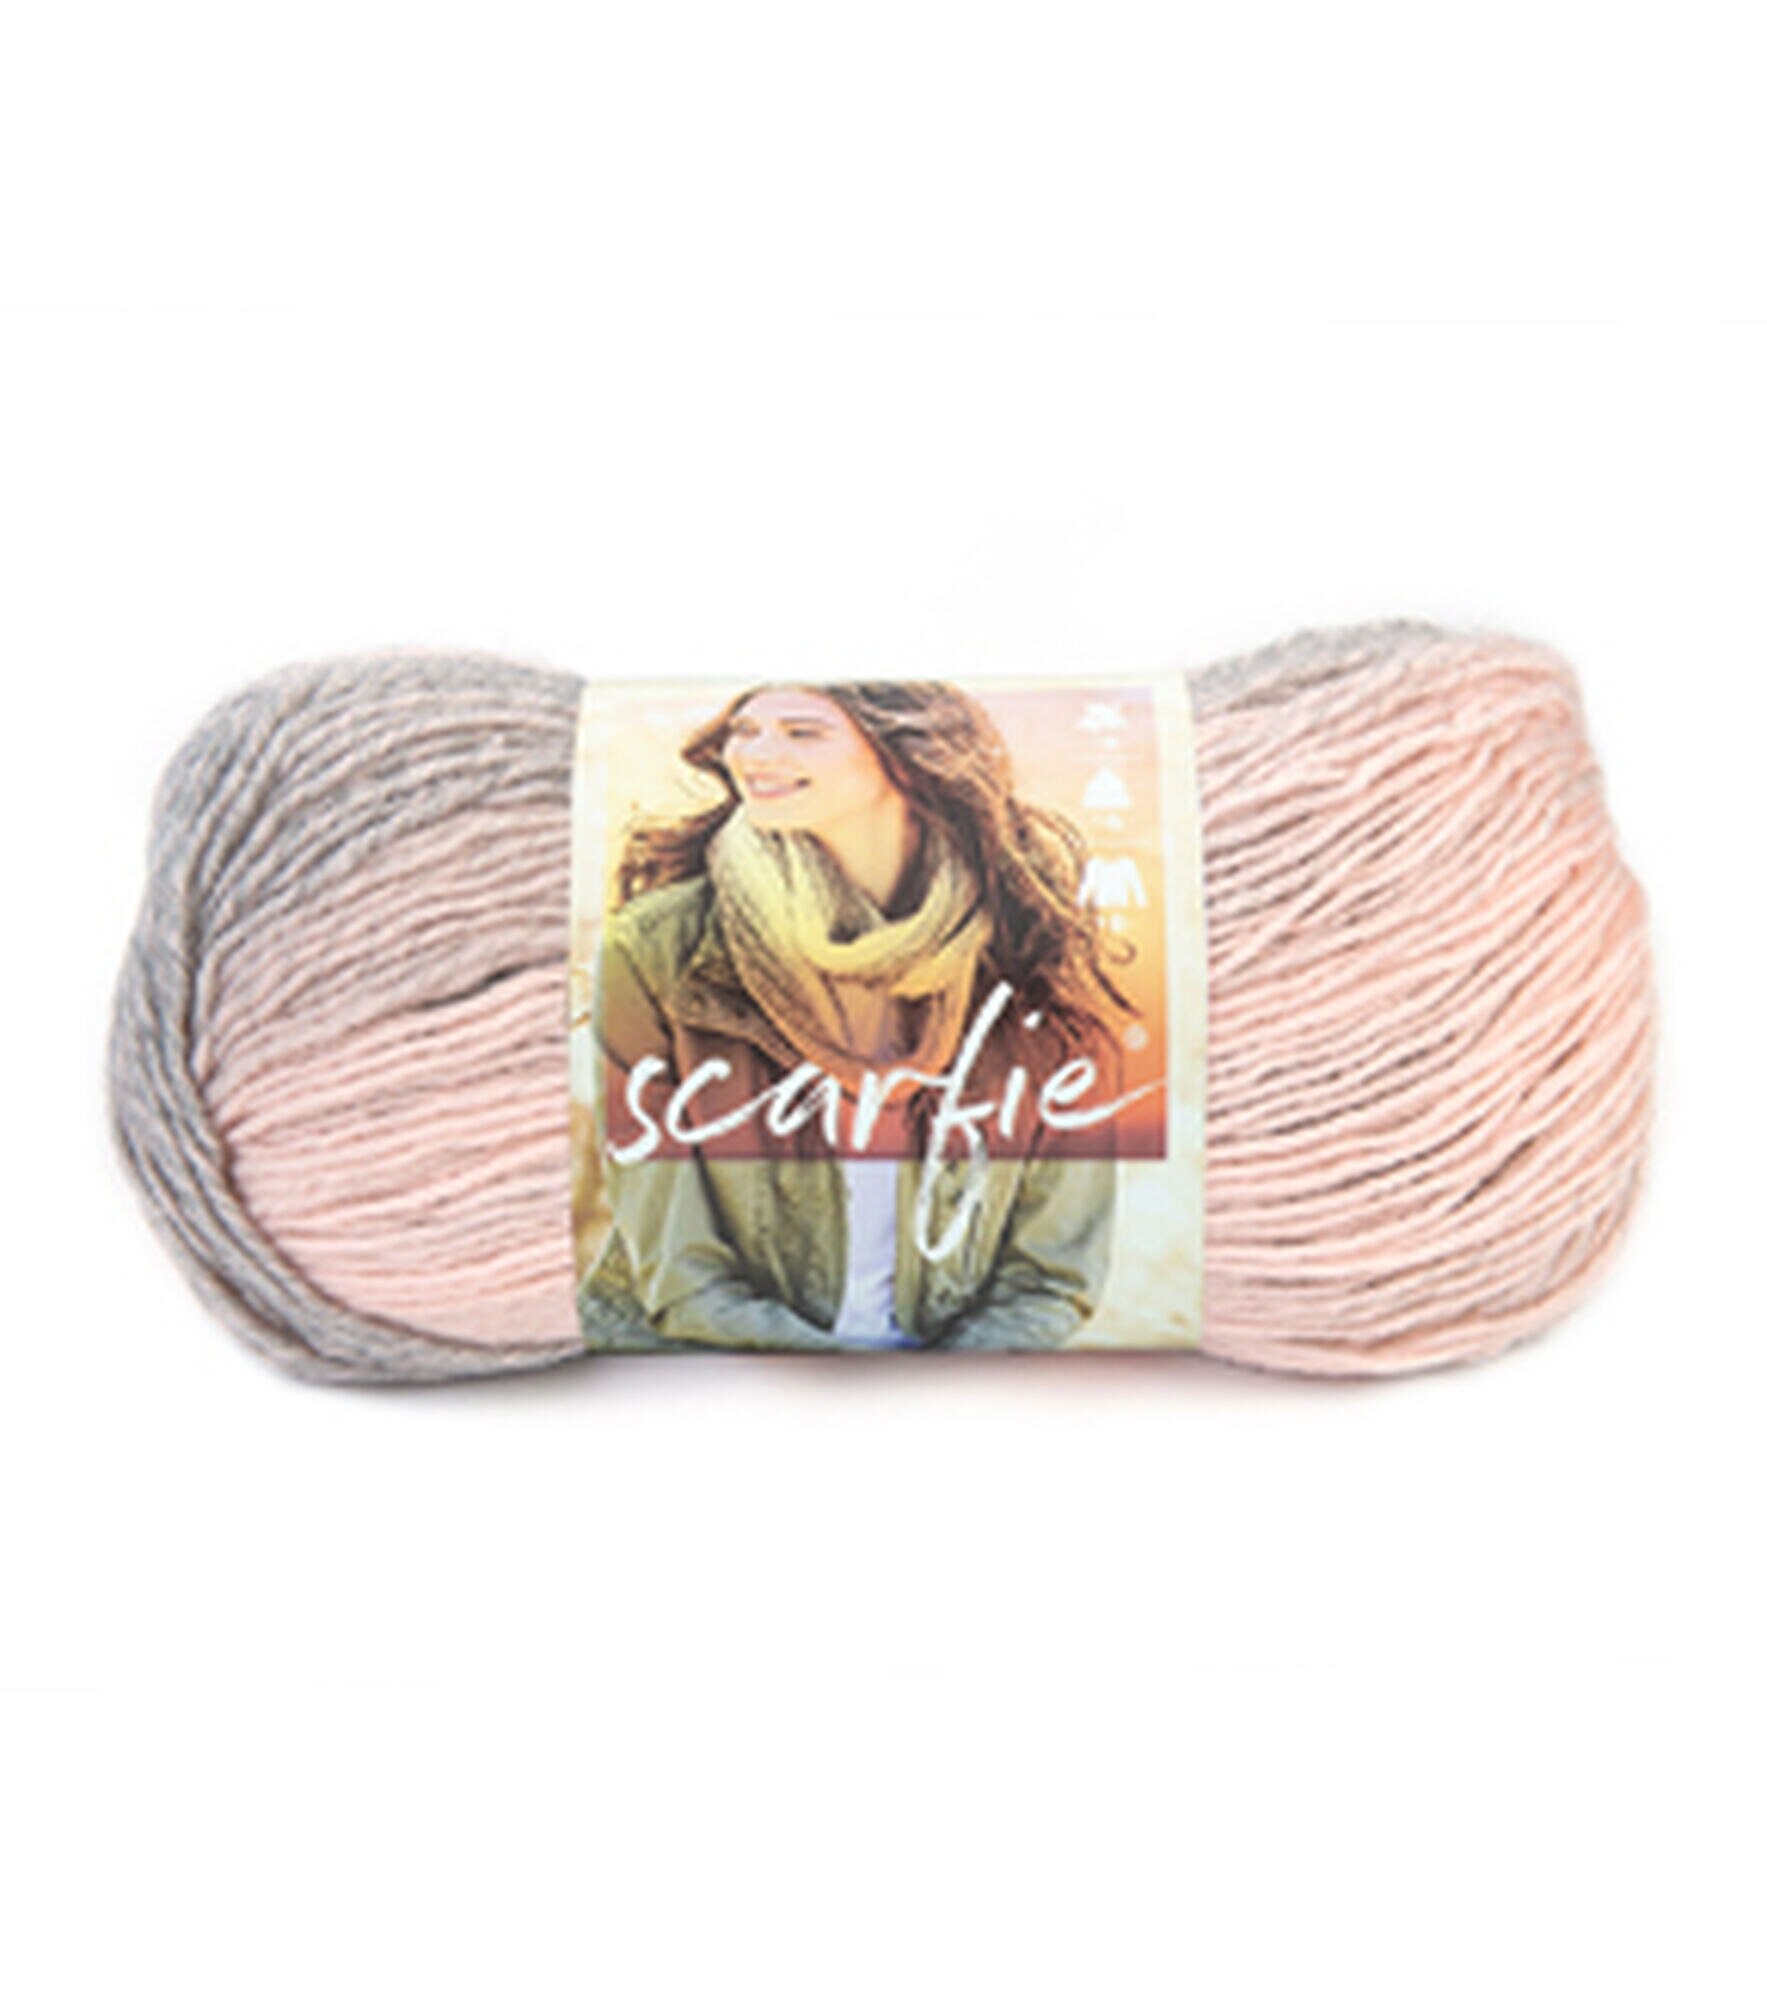 Lion Brand Scarfie 312yds Bulky Acrylic Blend Yarn, Pink Silver, hi-res